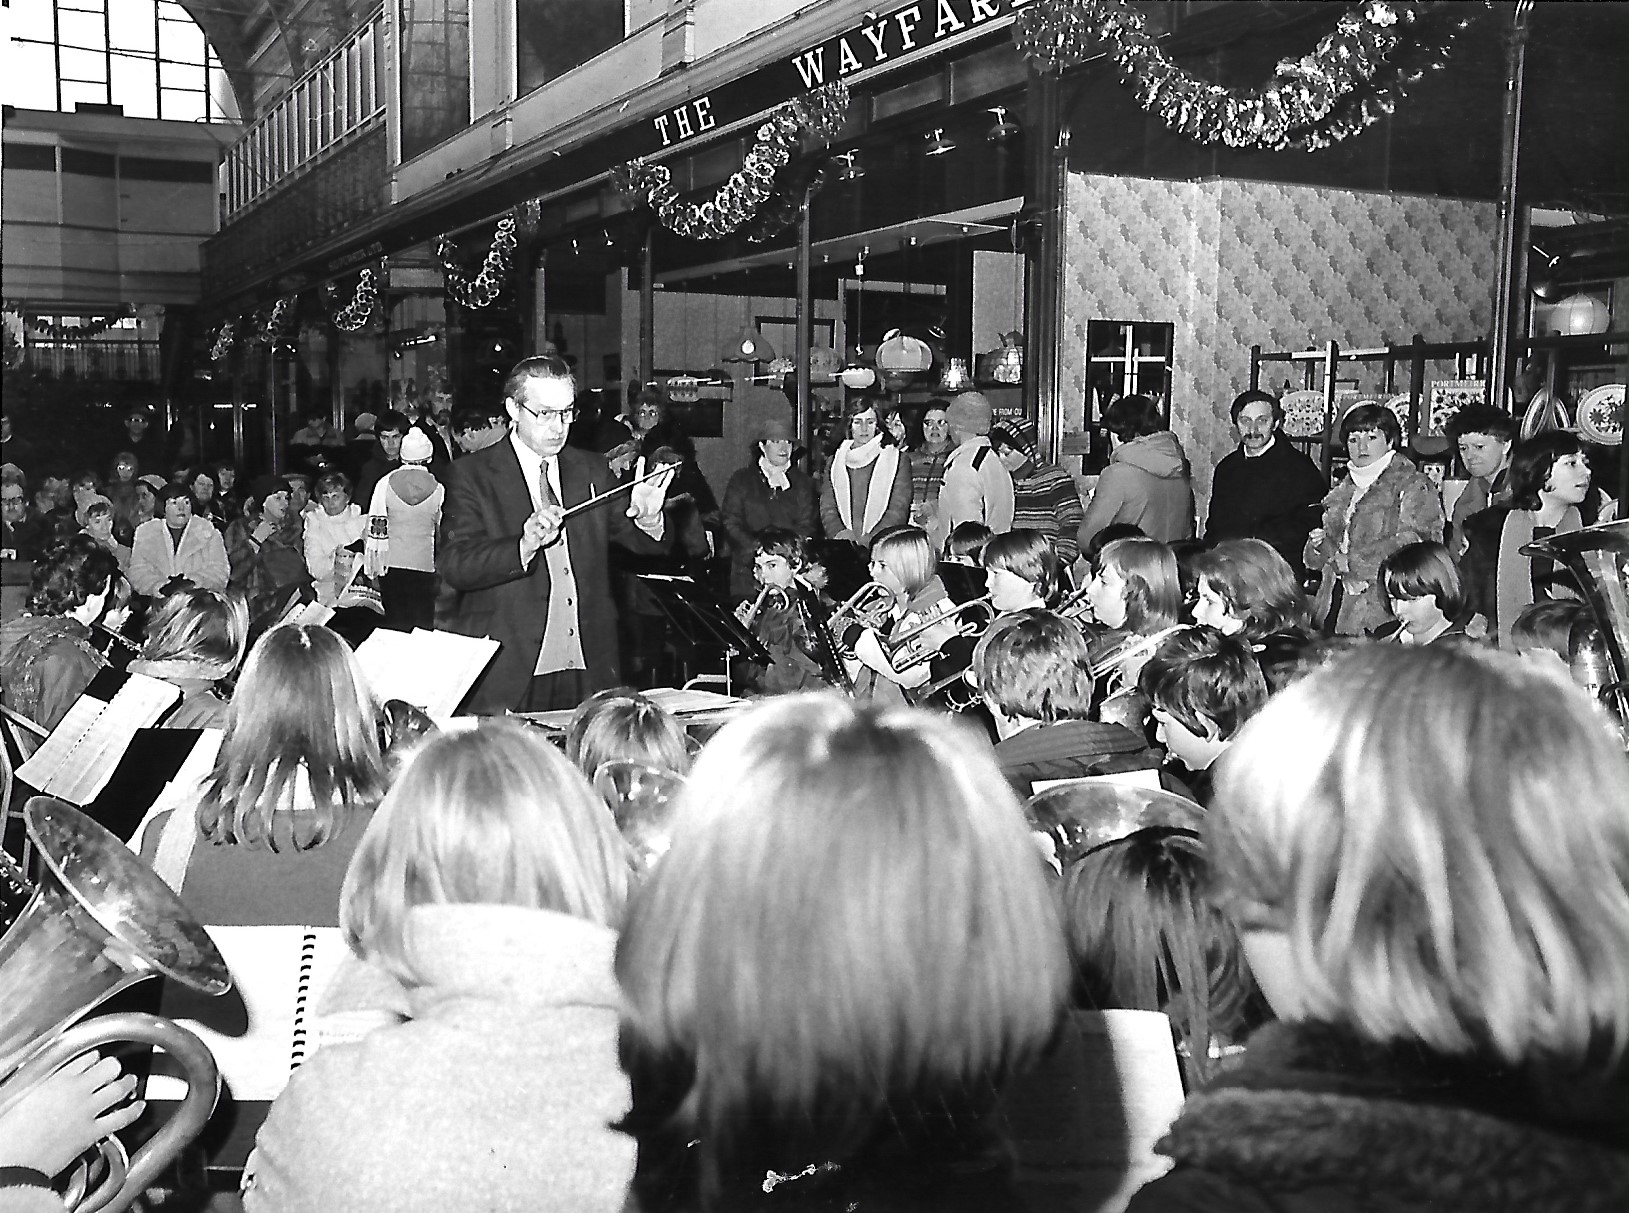 Shoppers at Wayfarers Shopping Arcade in Southport were treated to Christmas Carols from a variety of bands plus a visit from the Southport Theatre pantomime cast in December 1982